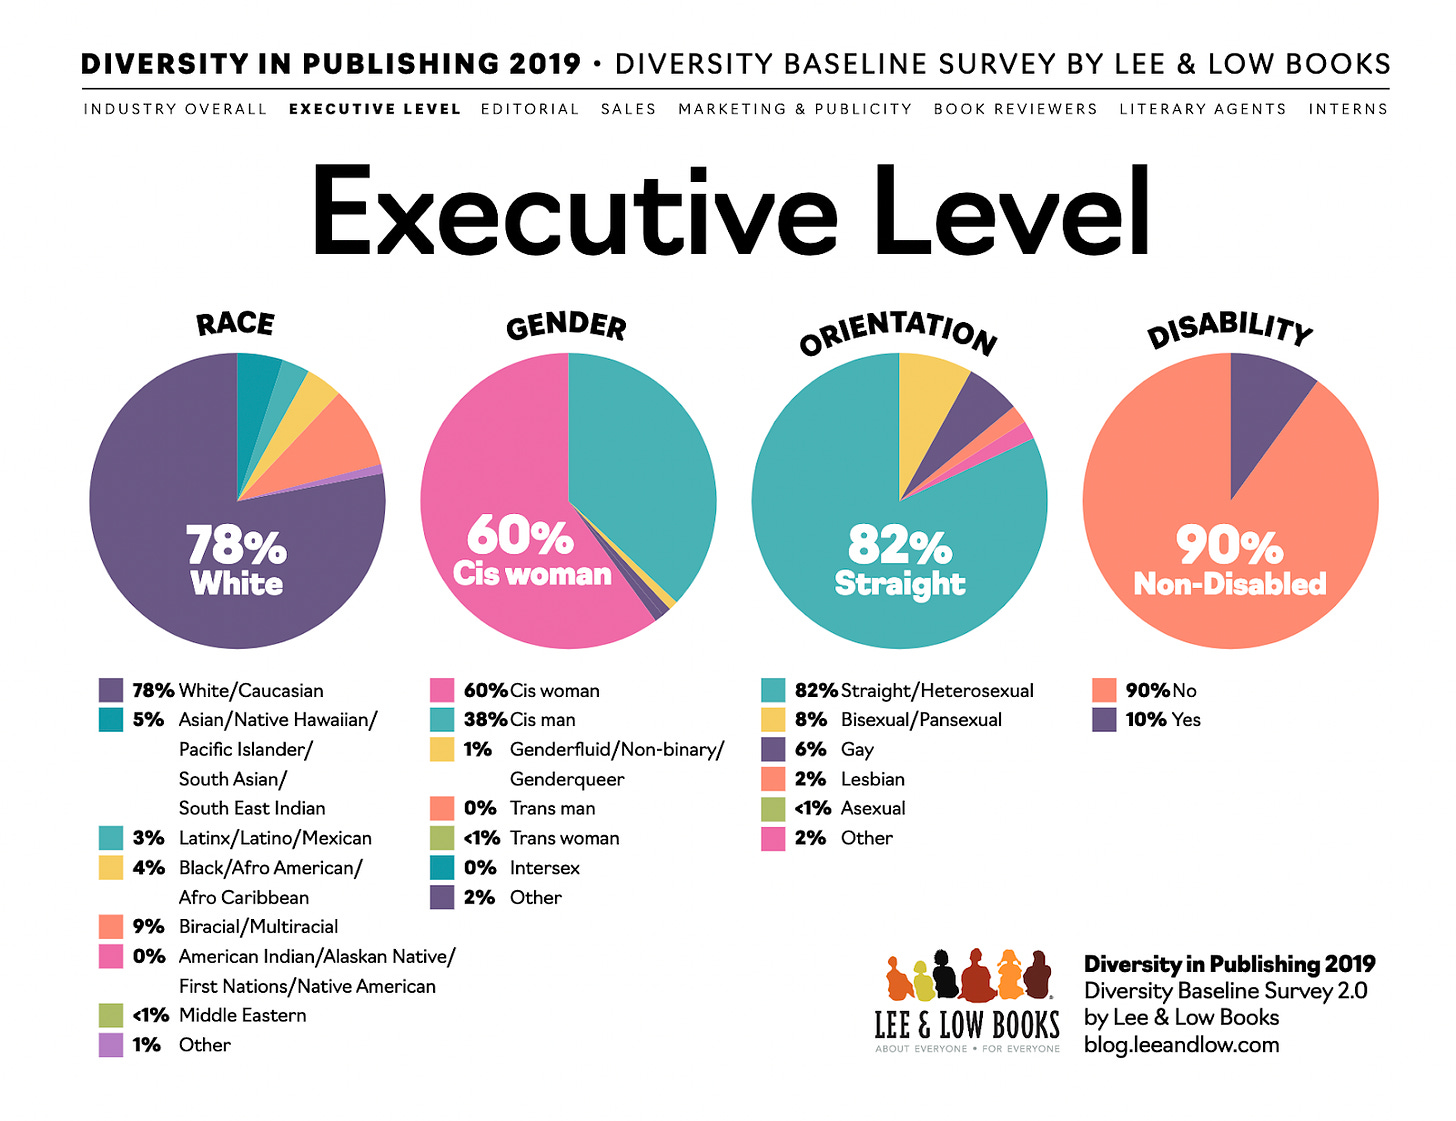 A diversity in publishing report showing race, gender, orientation, and disability of executives in publishing.